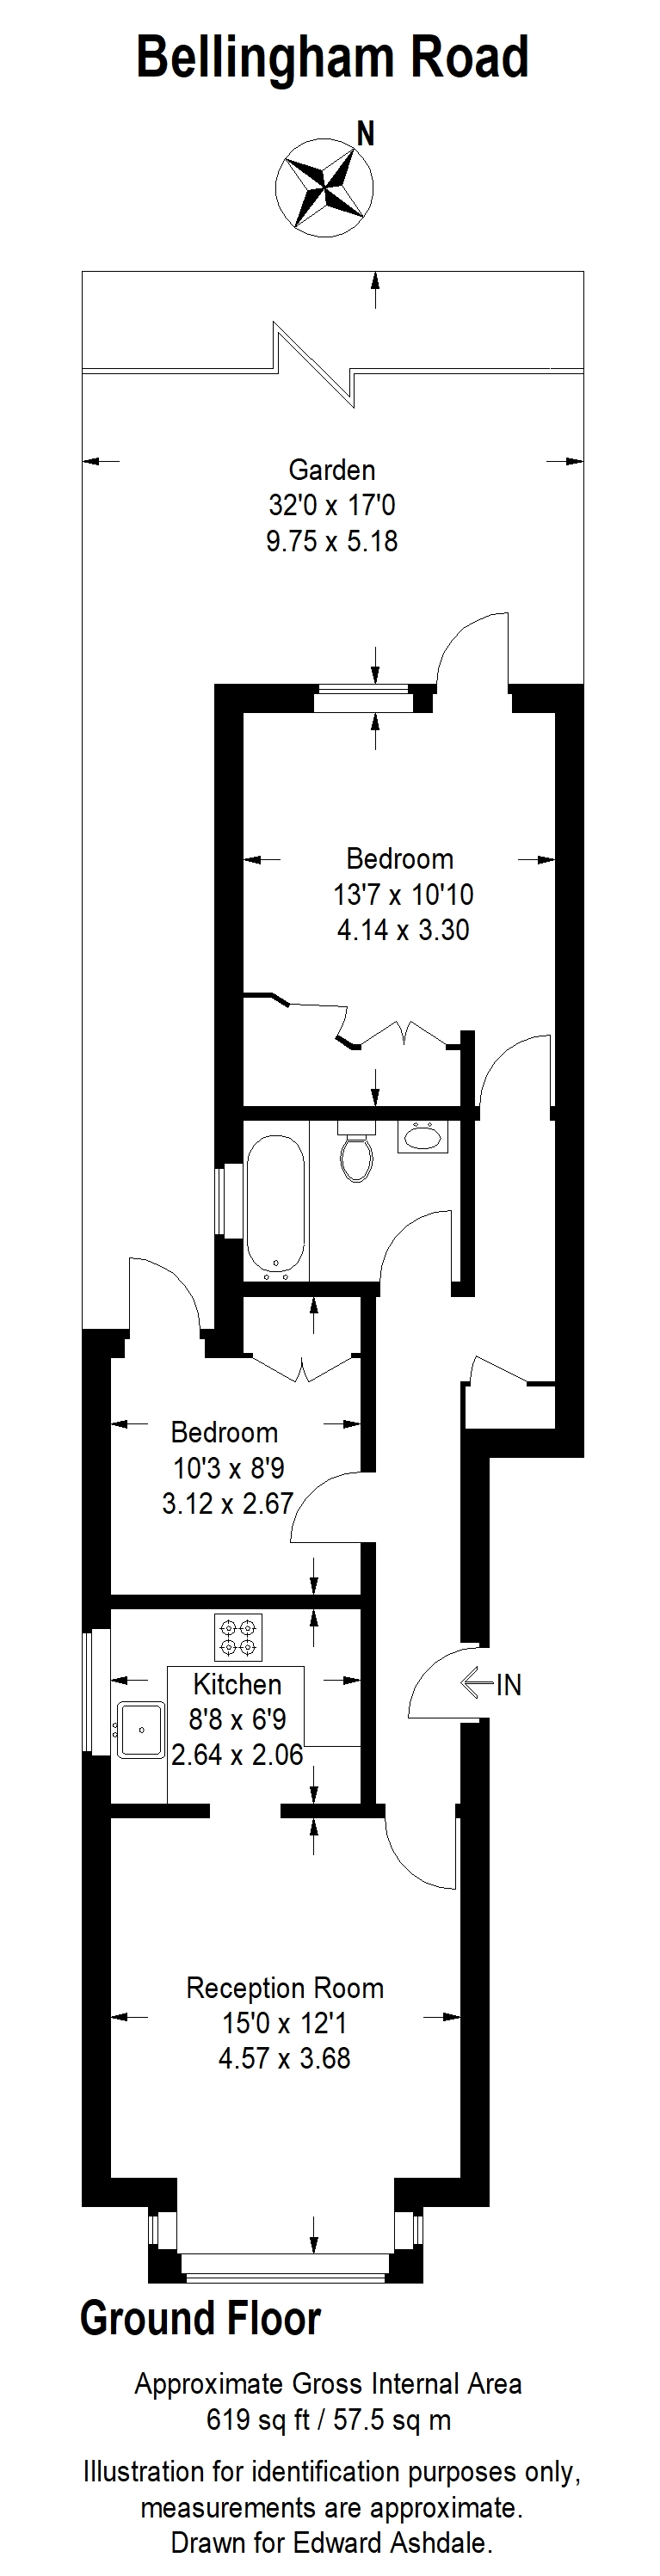 2 bed apartment for sale - Property floorplan